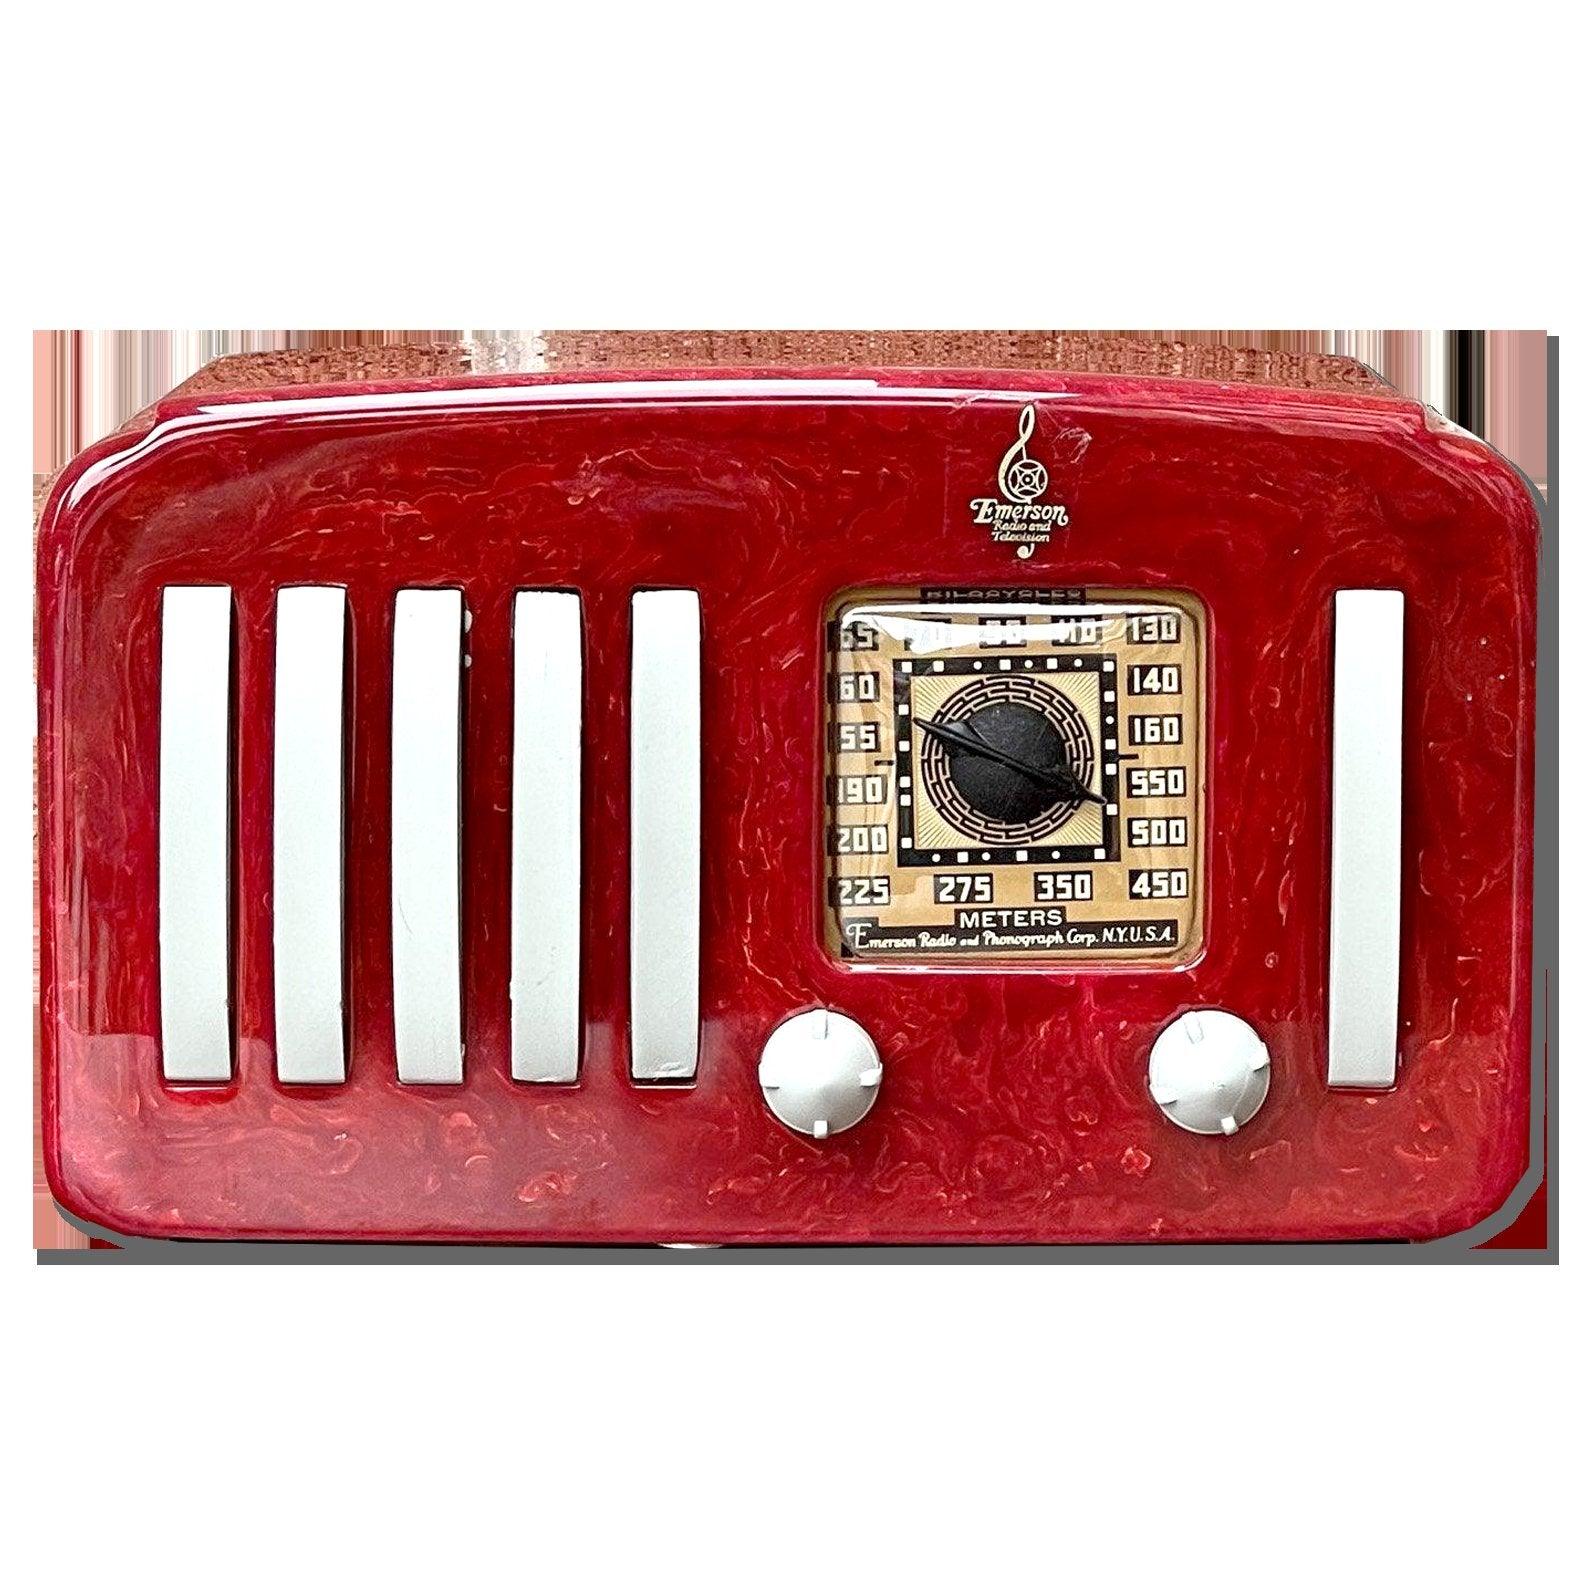 Sold Items - Selling Catalin Radios and Art Deco Radios